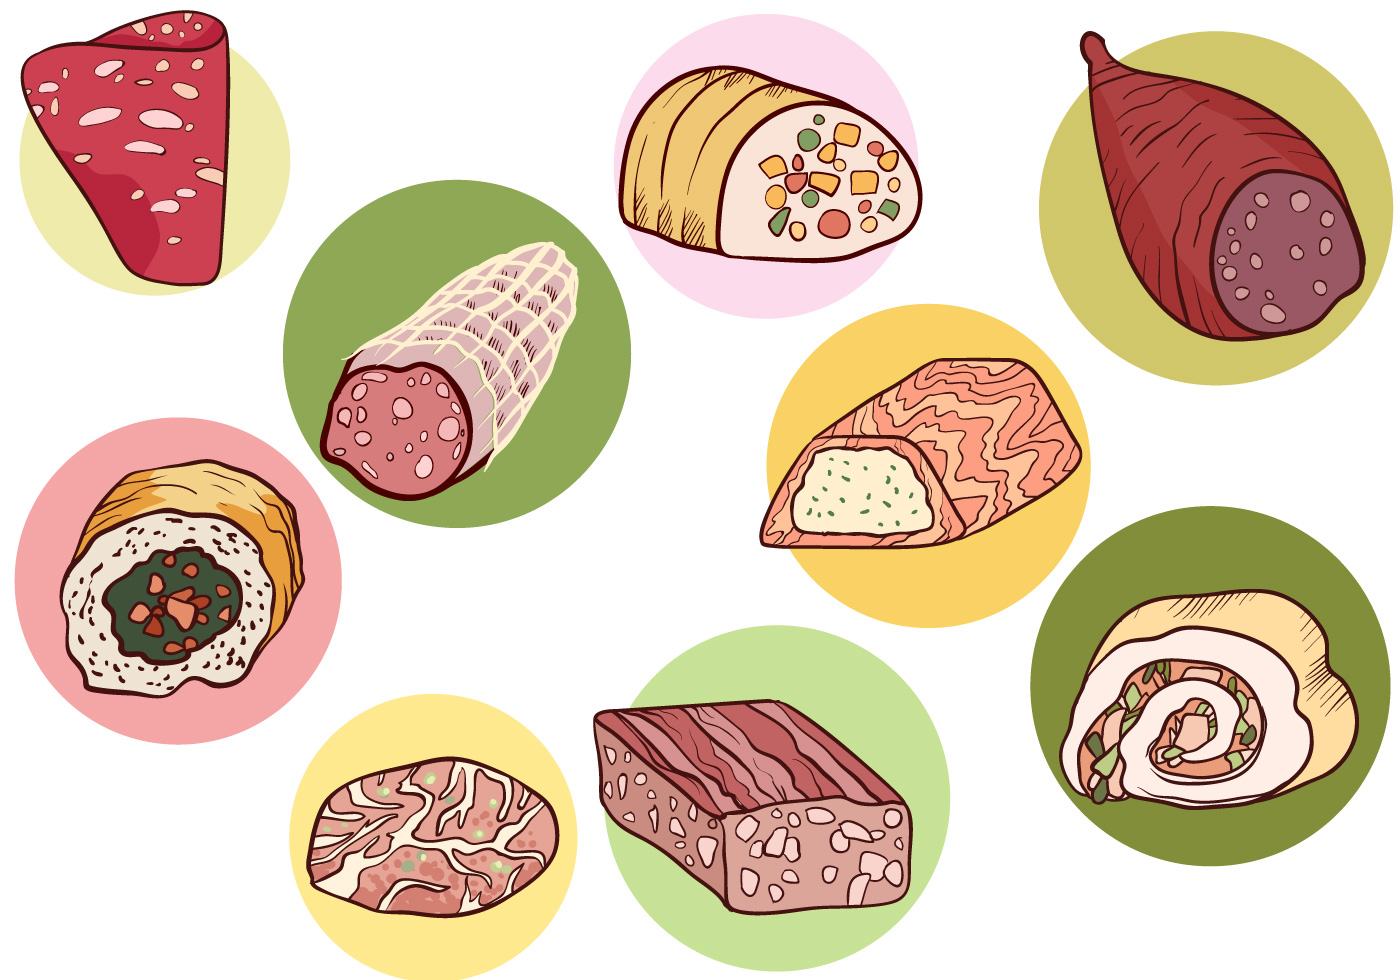 Download the Free Charcuterie Vectors 150553